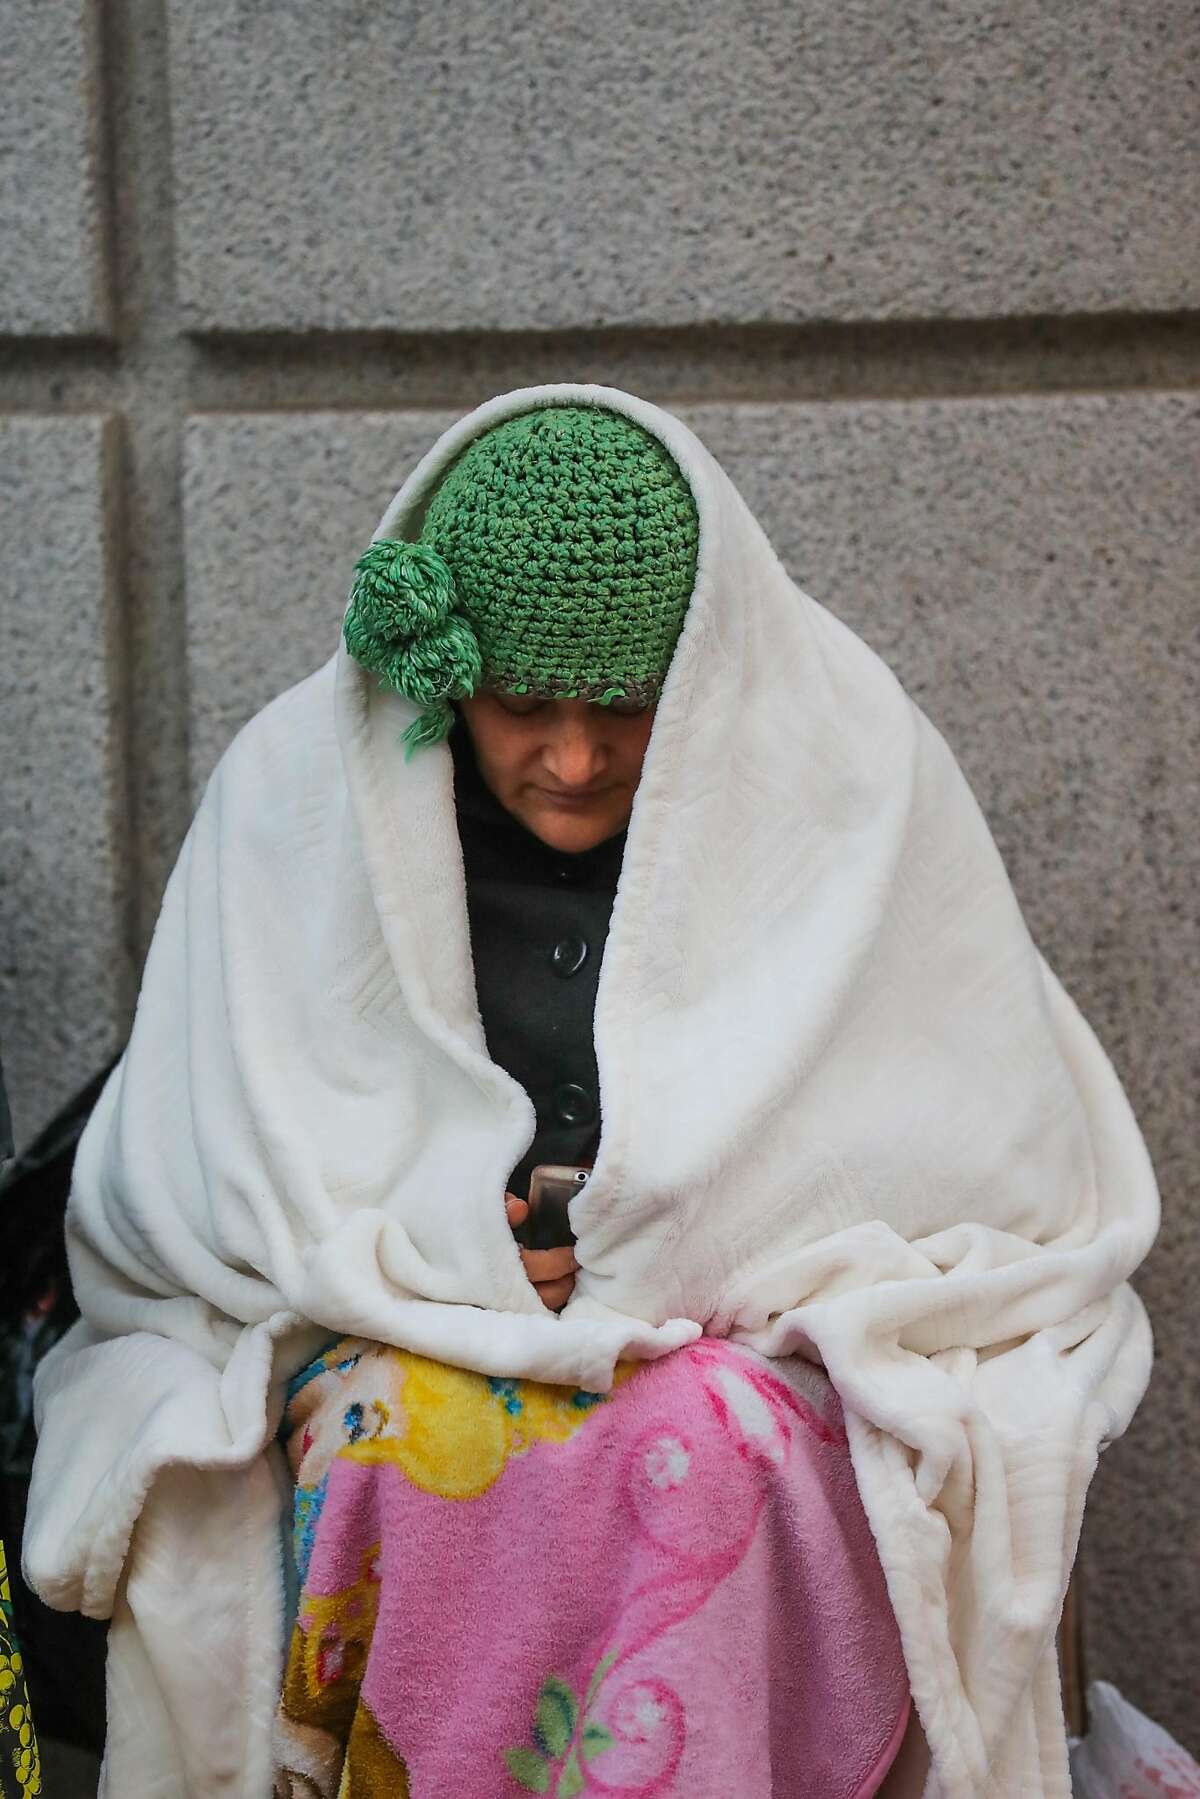 Maria Lopez, who camped out overnight, bundles up as she sits on Market Street, waiting for Hamilton tickets to go on sale, in San Francisco, California, on Monday, Dec. 12, 2016.